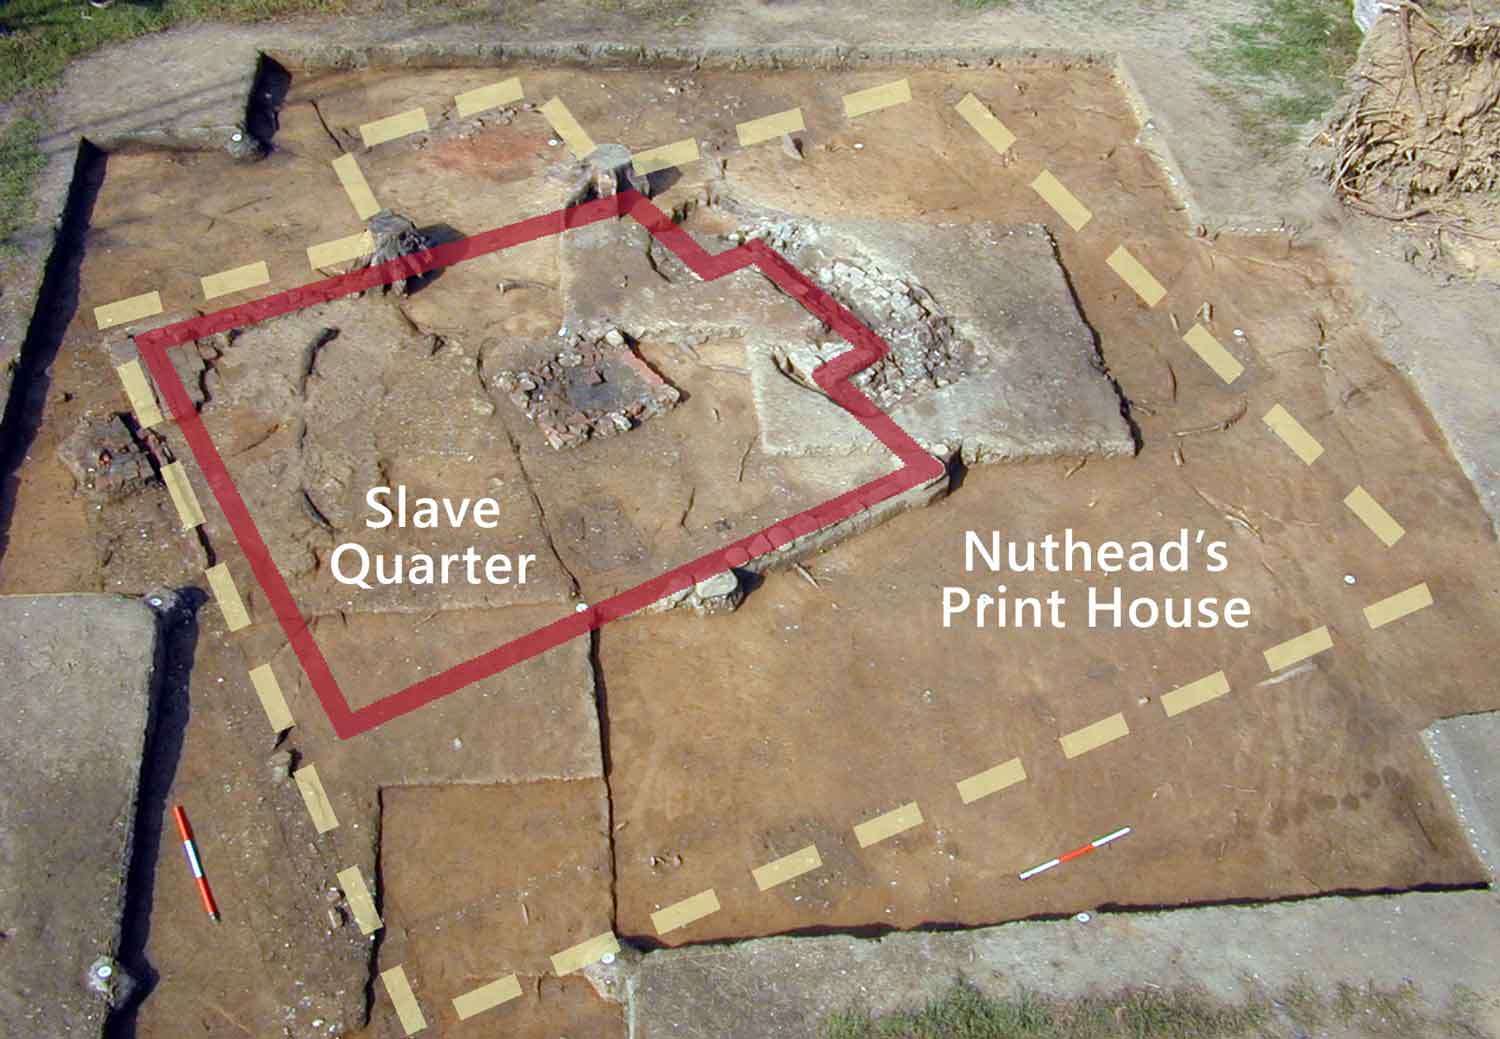 Archaeological remains of the 19th-century single quarter overlaying the 17th-century Print House